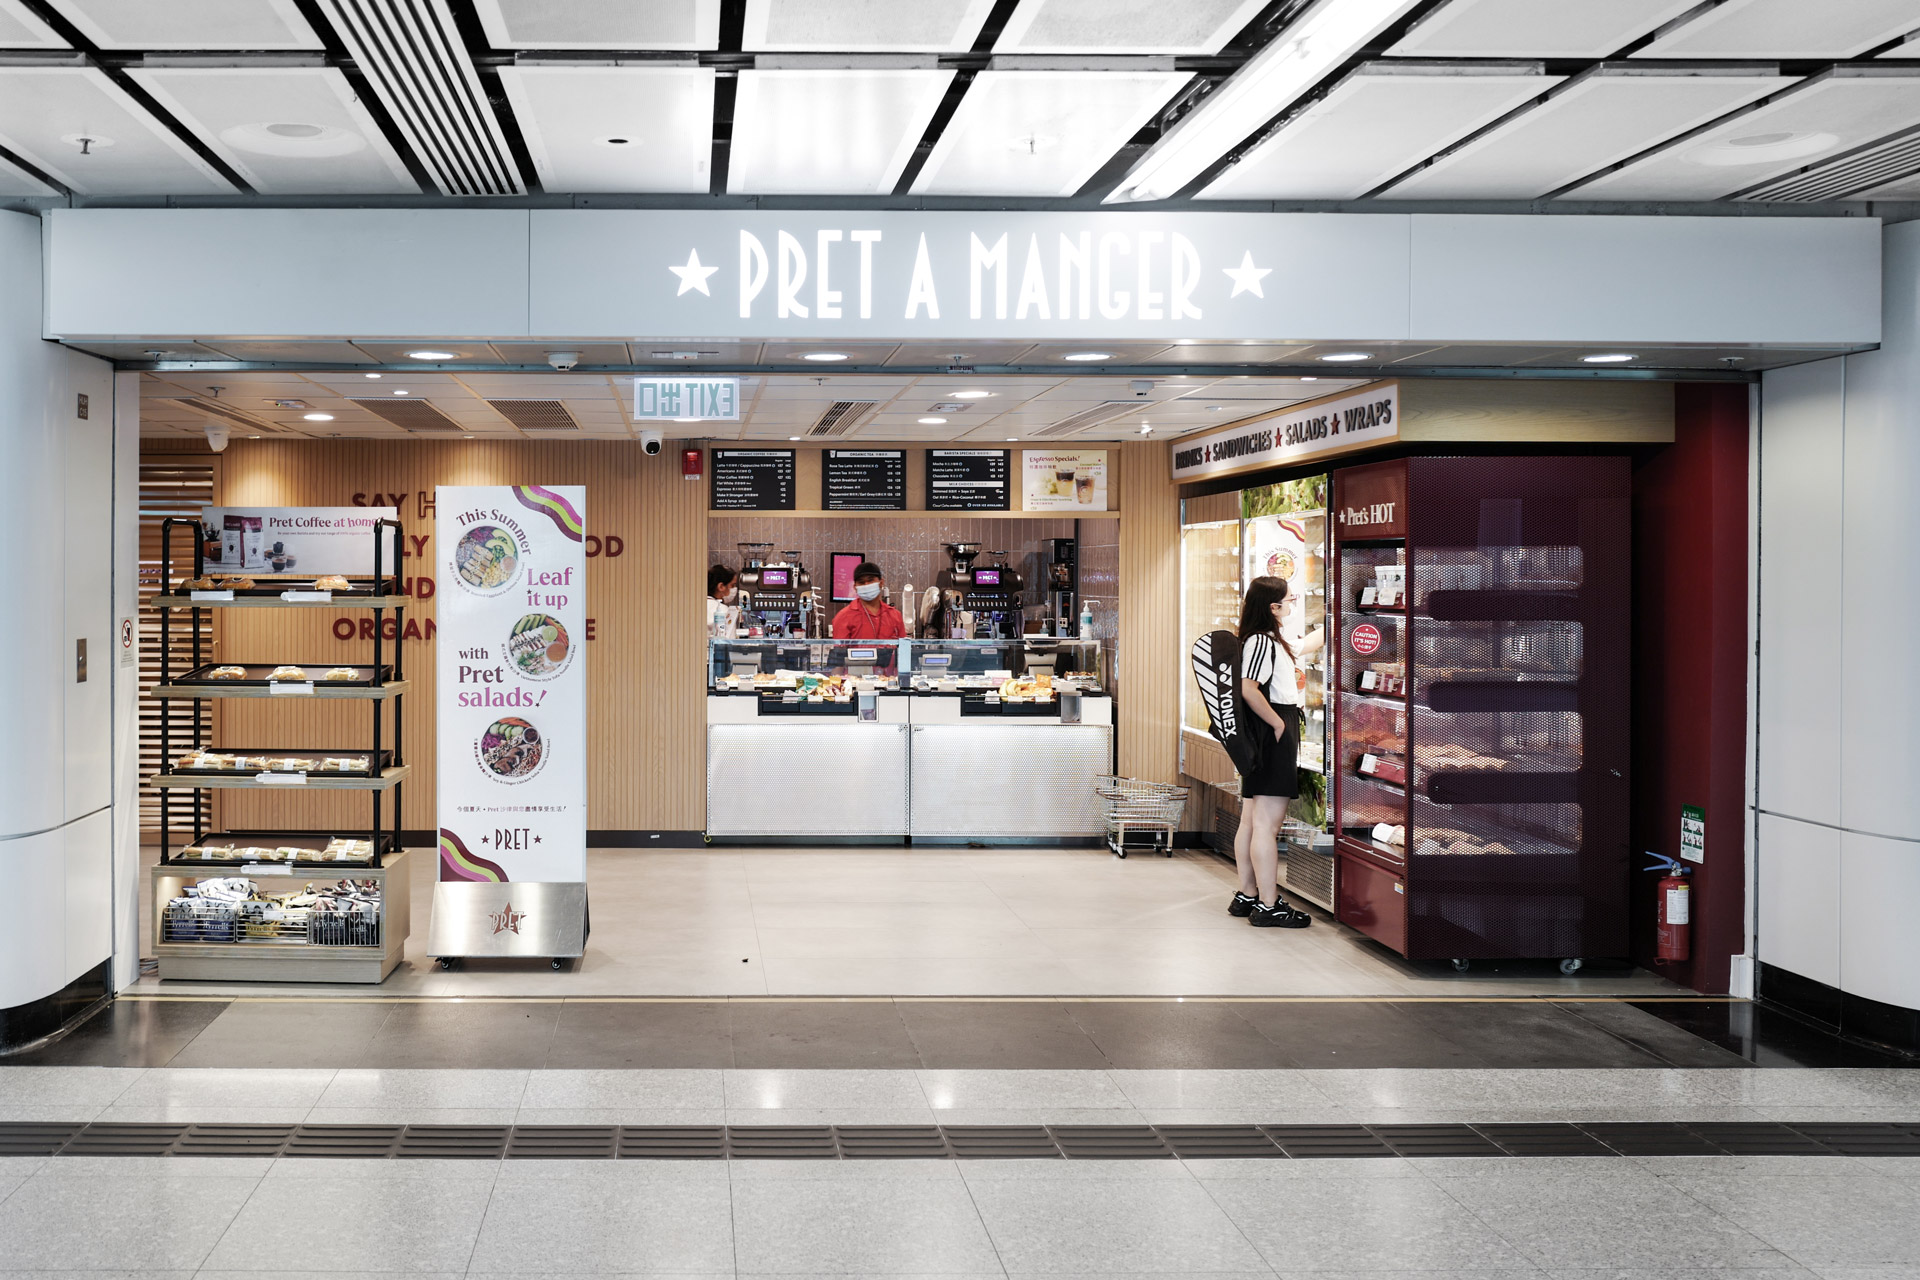 Pret A Manger Hung Hom Station Hong Kong Store Interior Design and Styling by Plaap Design